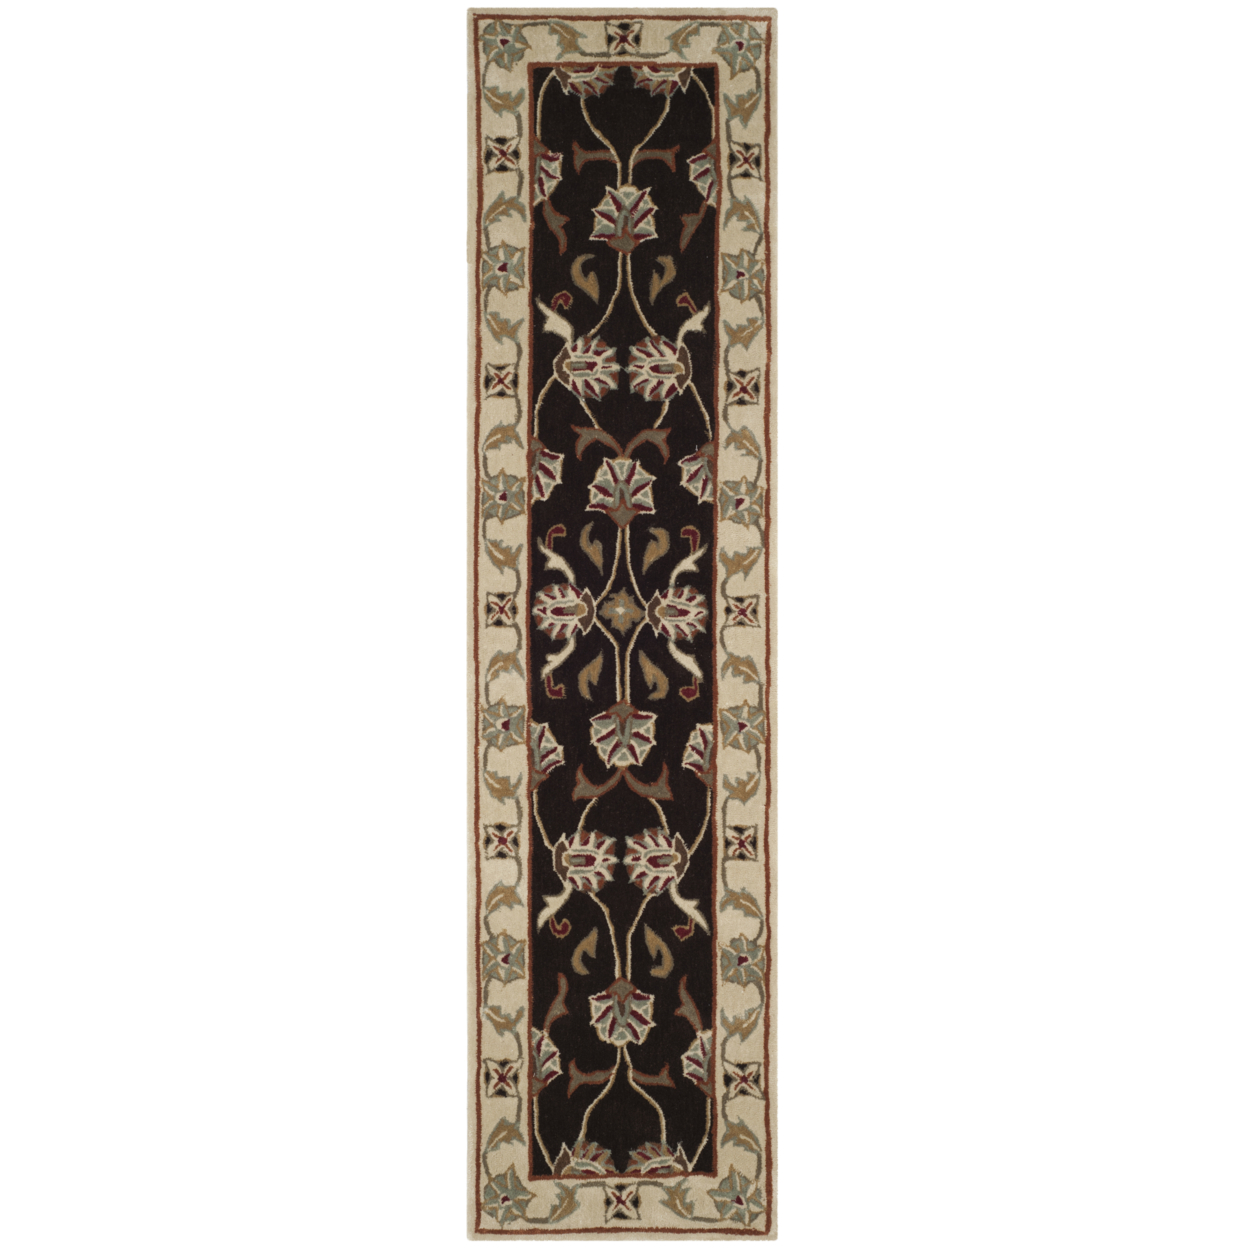 SAFAVIEH TLP742A Total Performance Brown / Ivory - 6' X 9'